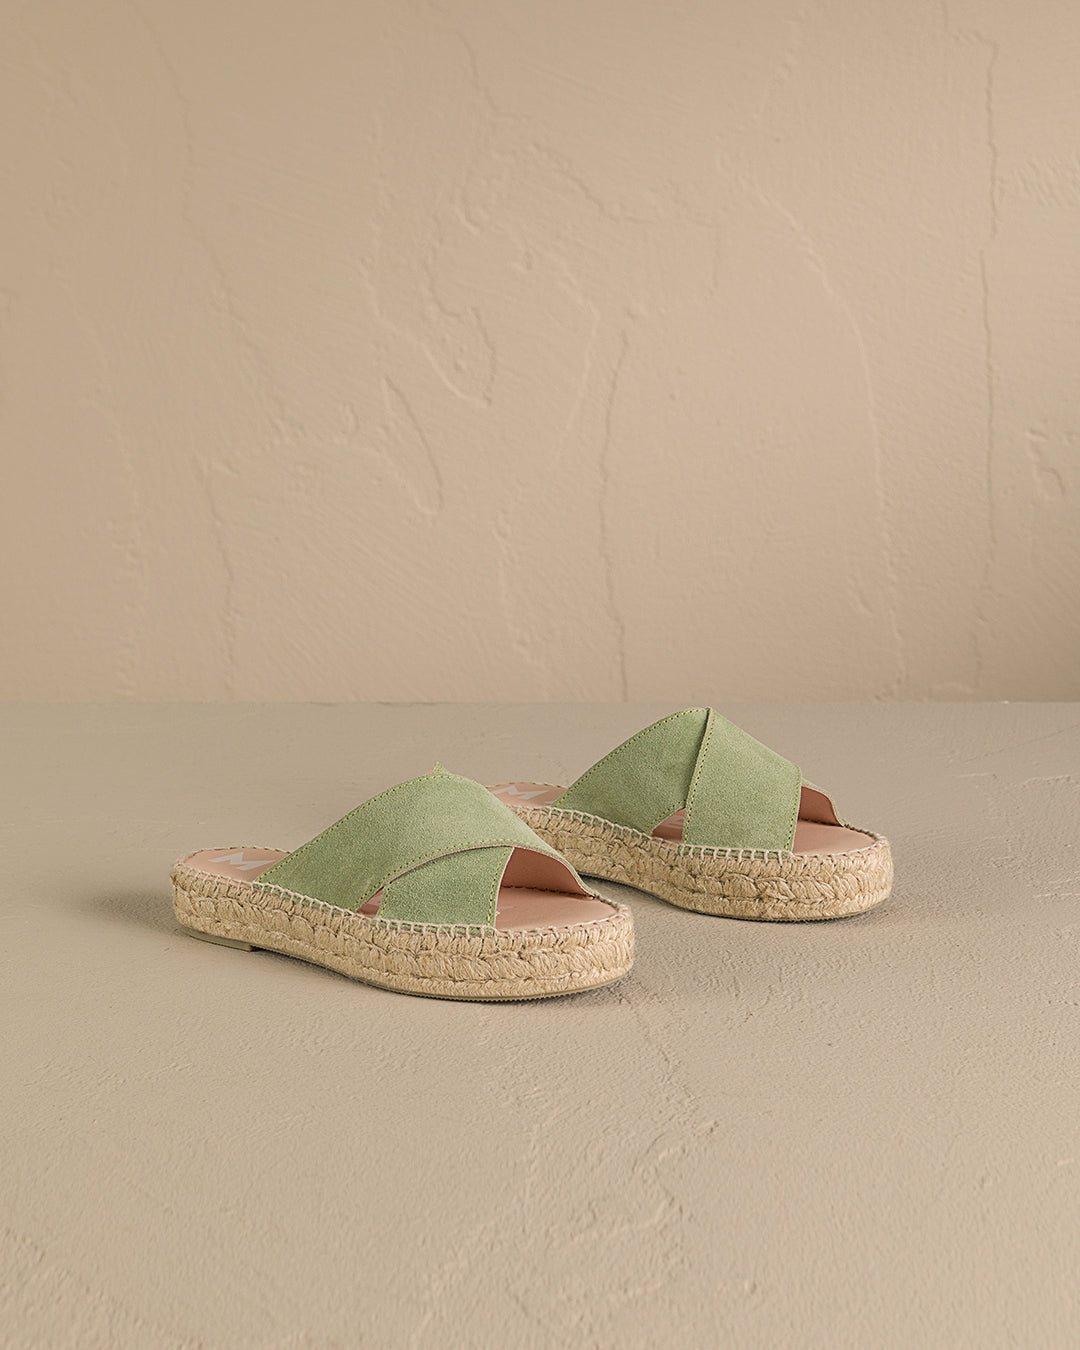 Suede Double Sole|Crossed Bands Sandals - Hamptons Sage